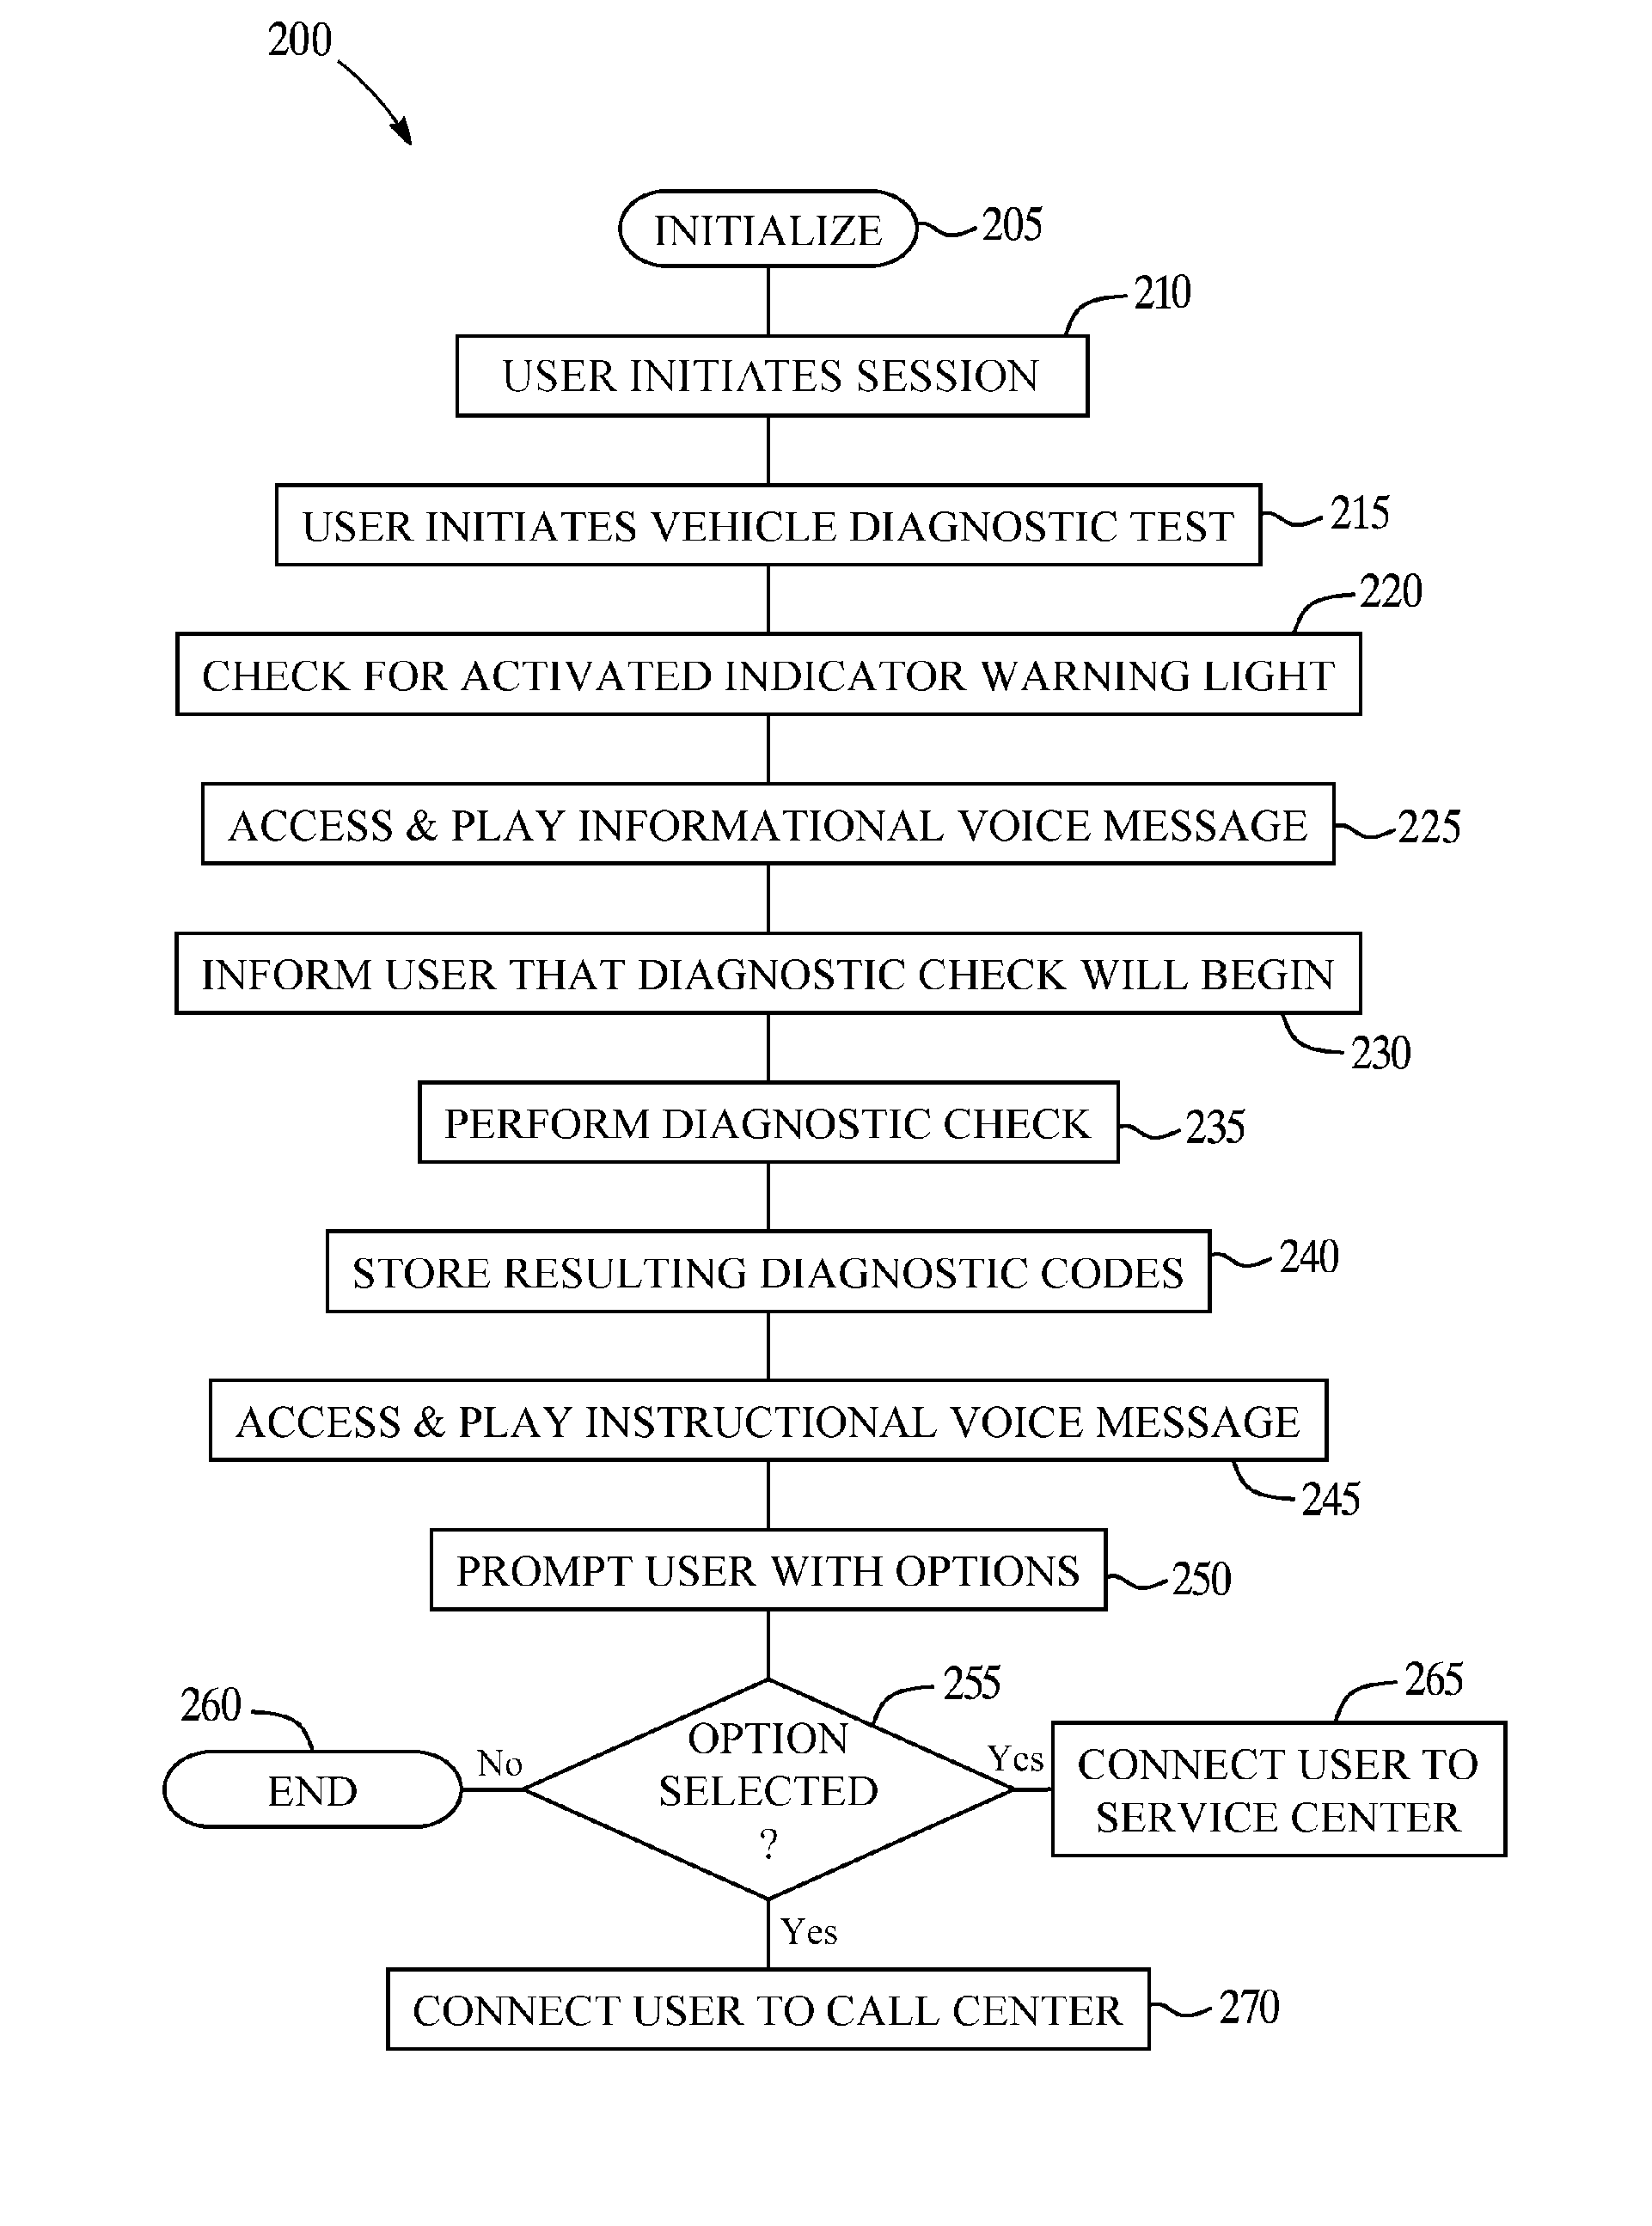 Vehicle diagnostic test and reporting method